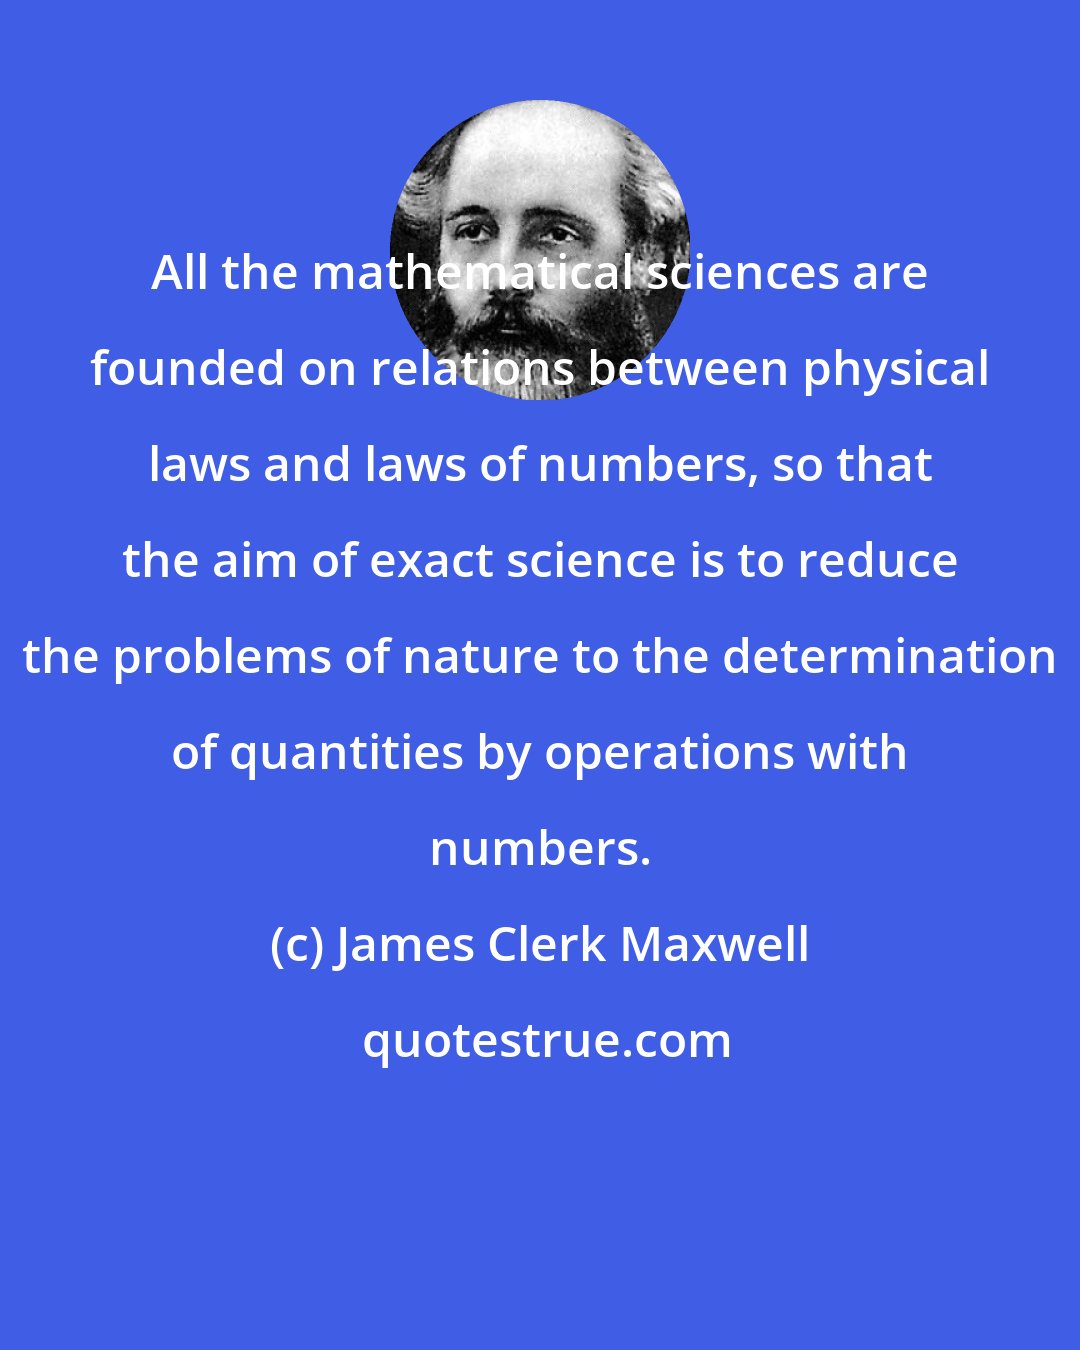 James Clerk Maxwell: All the mathematical sciences are founded on relations between physical laws and laws of numbers, so that the aim of exact science is to reduce the problems of nature to the determination of quantities by operations with numbers.